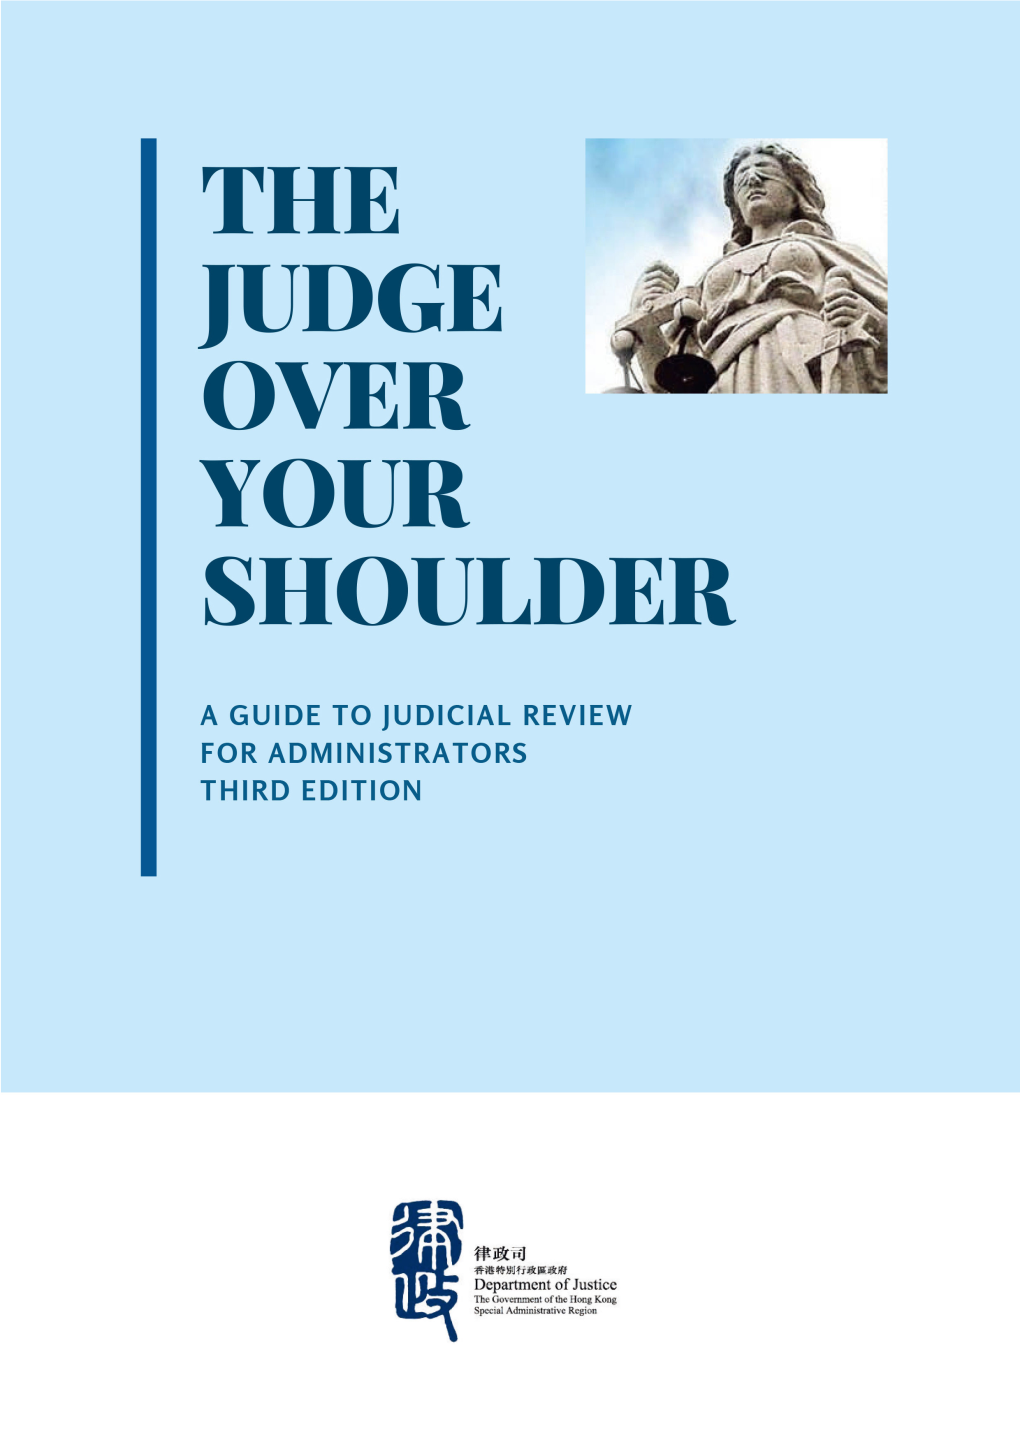 The Judge Over Your Shoulders – a Guide to Judicial Review for Administrators